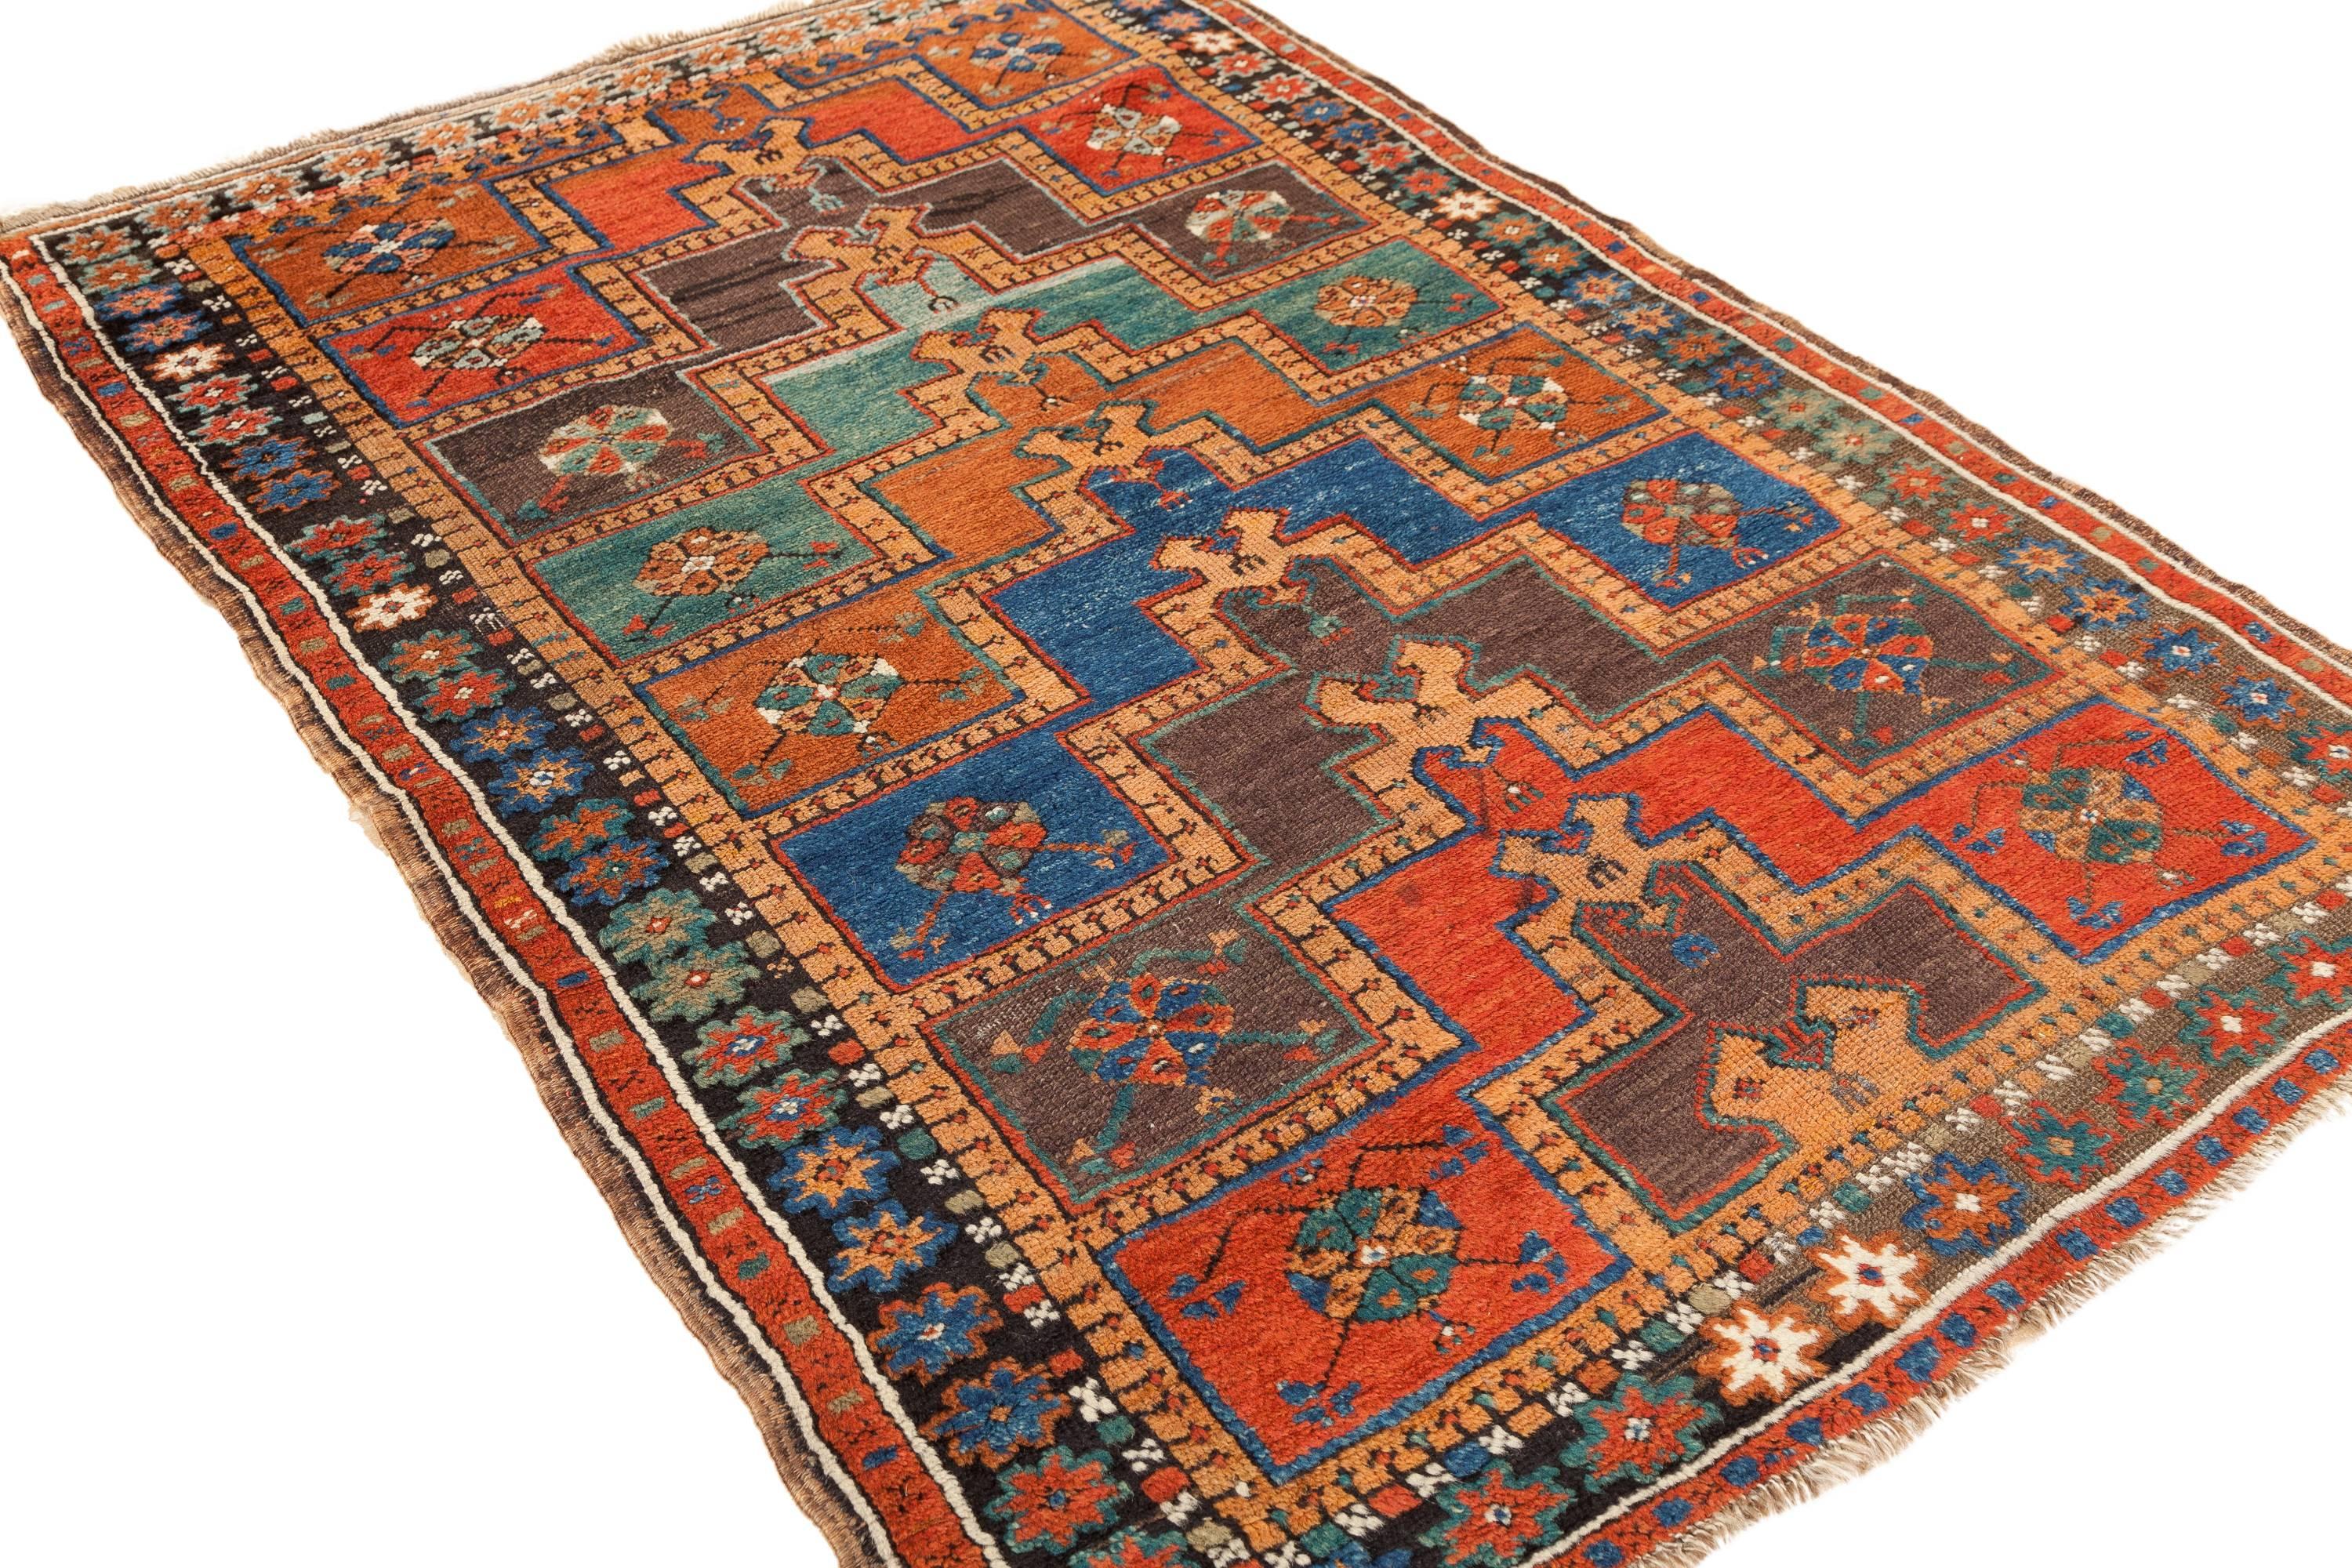 A Karapinar stepped arch prayer rug from Central Anatolia, dating to the mid-19th century. A most collectible example.